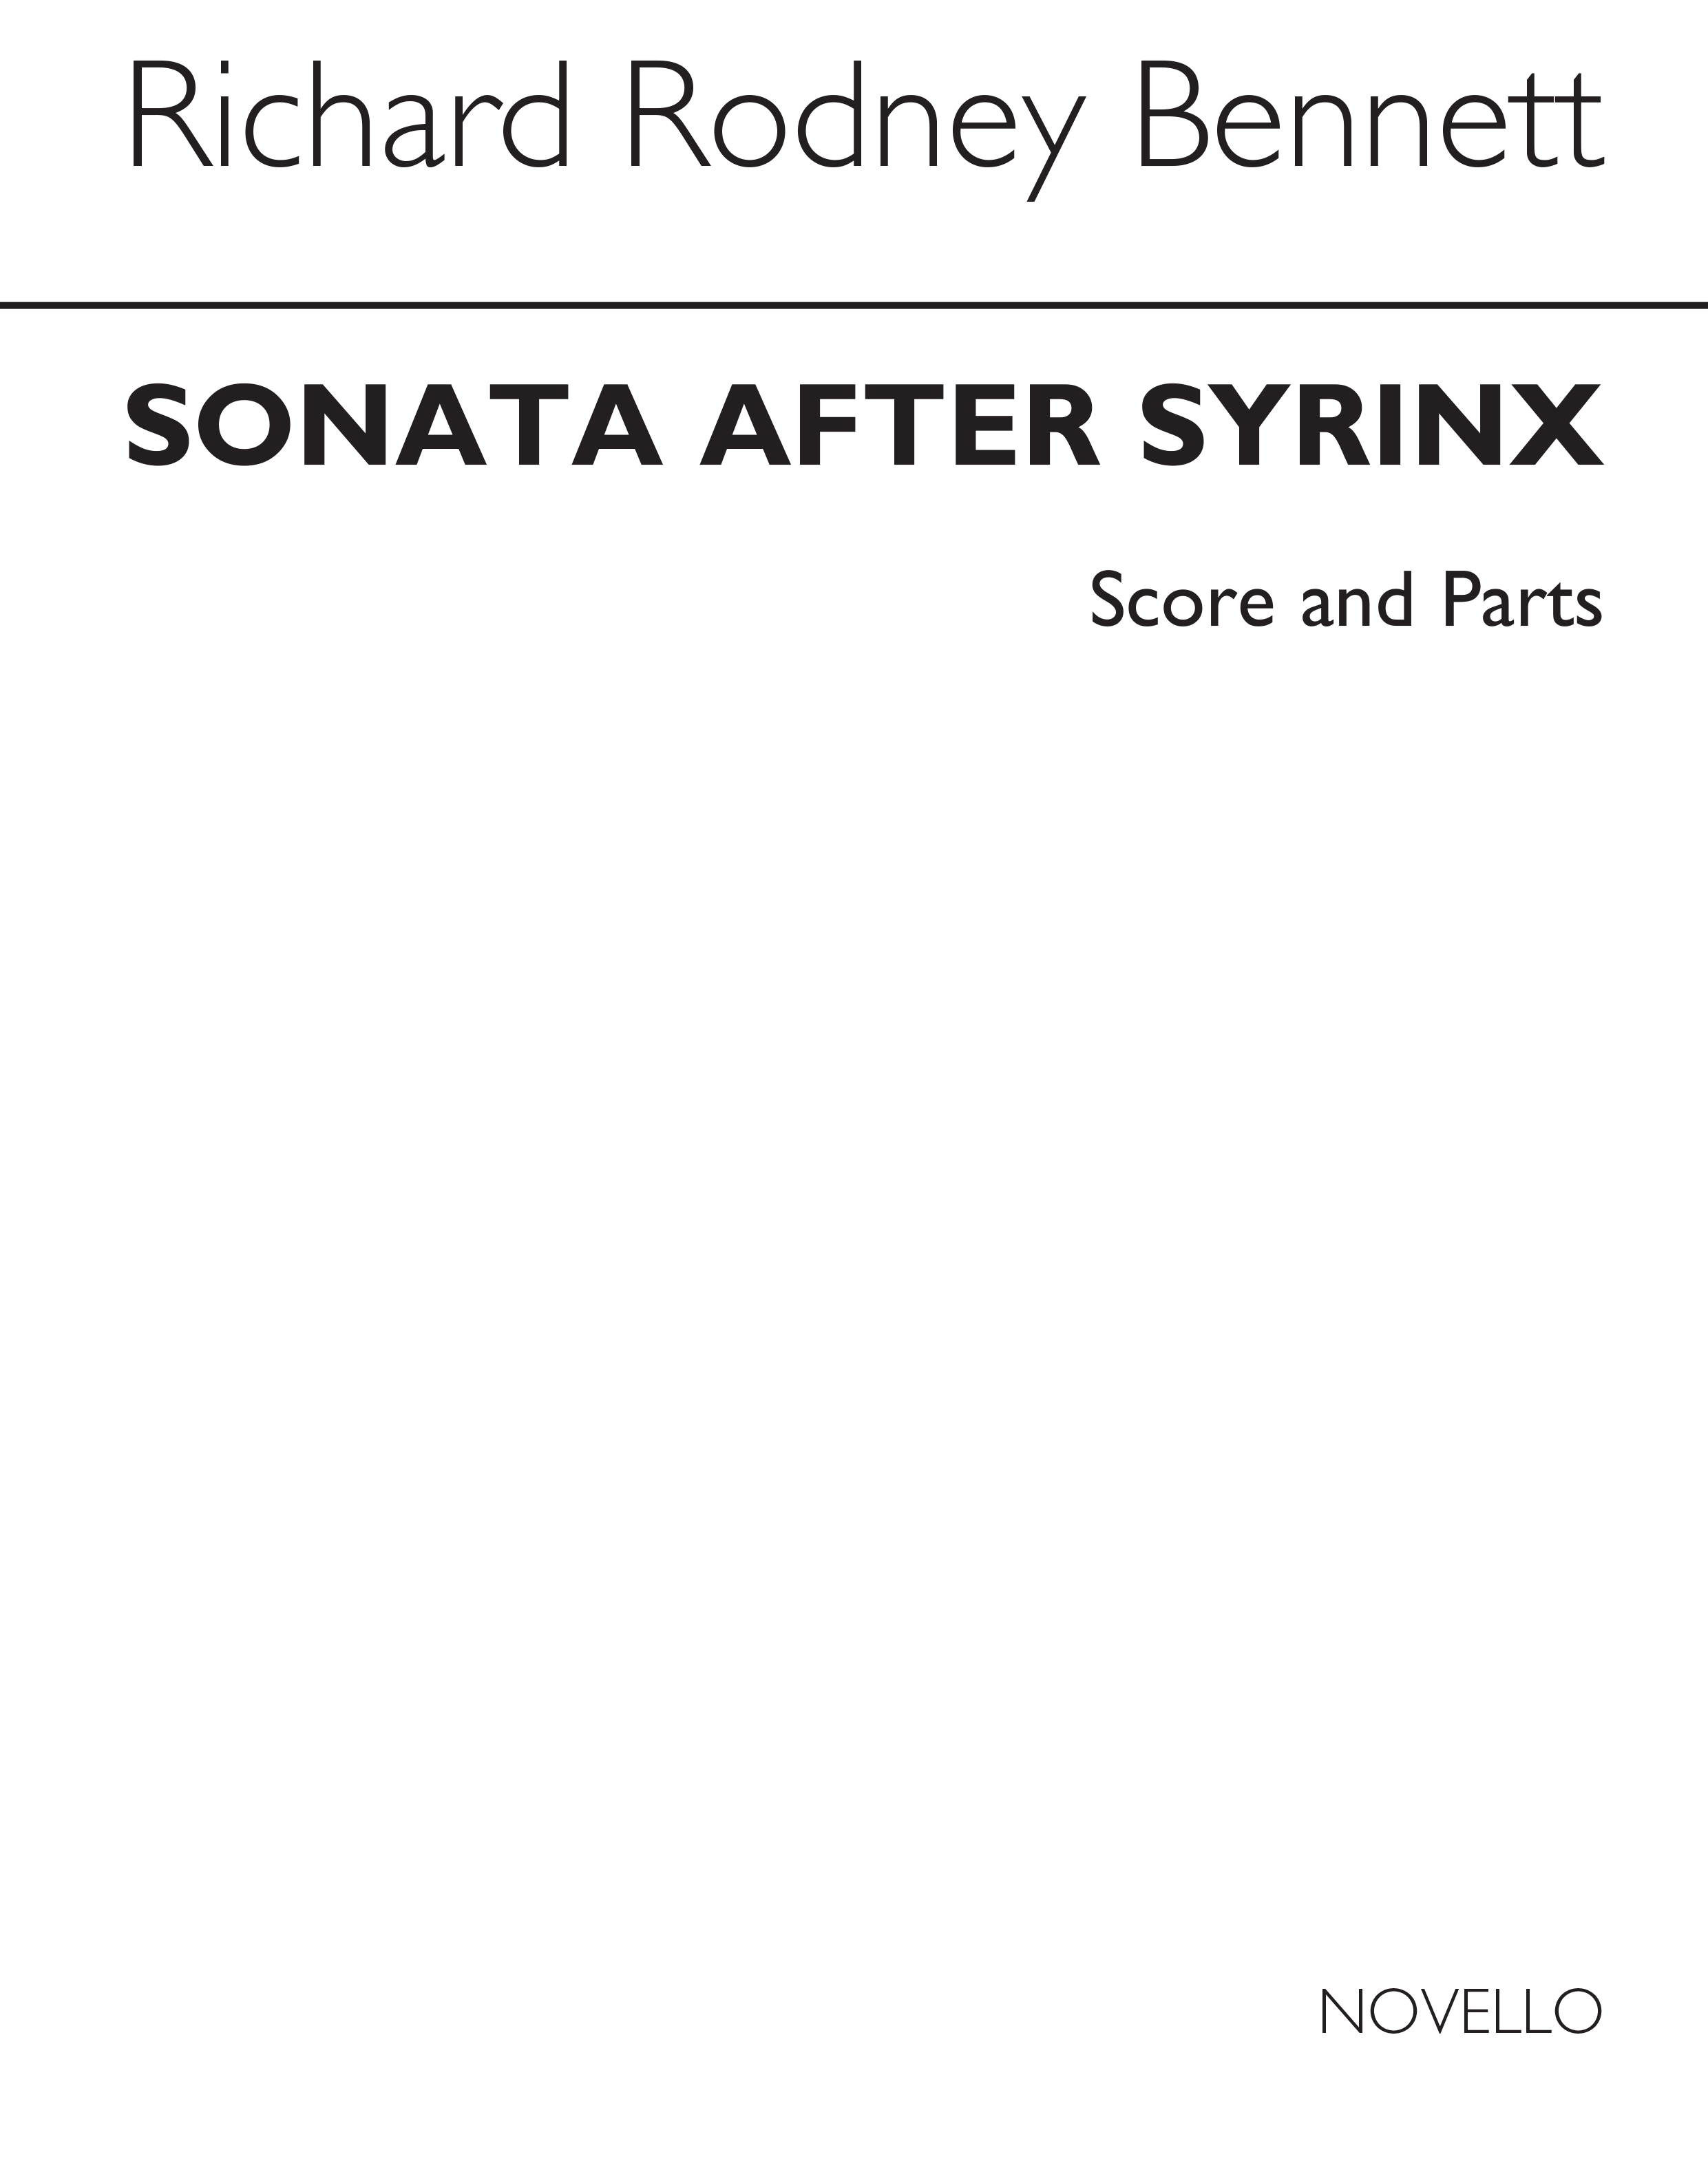 RR Bennett: Sonata After Syrinx (Score And Parts)